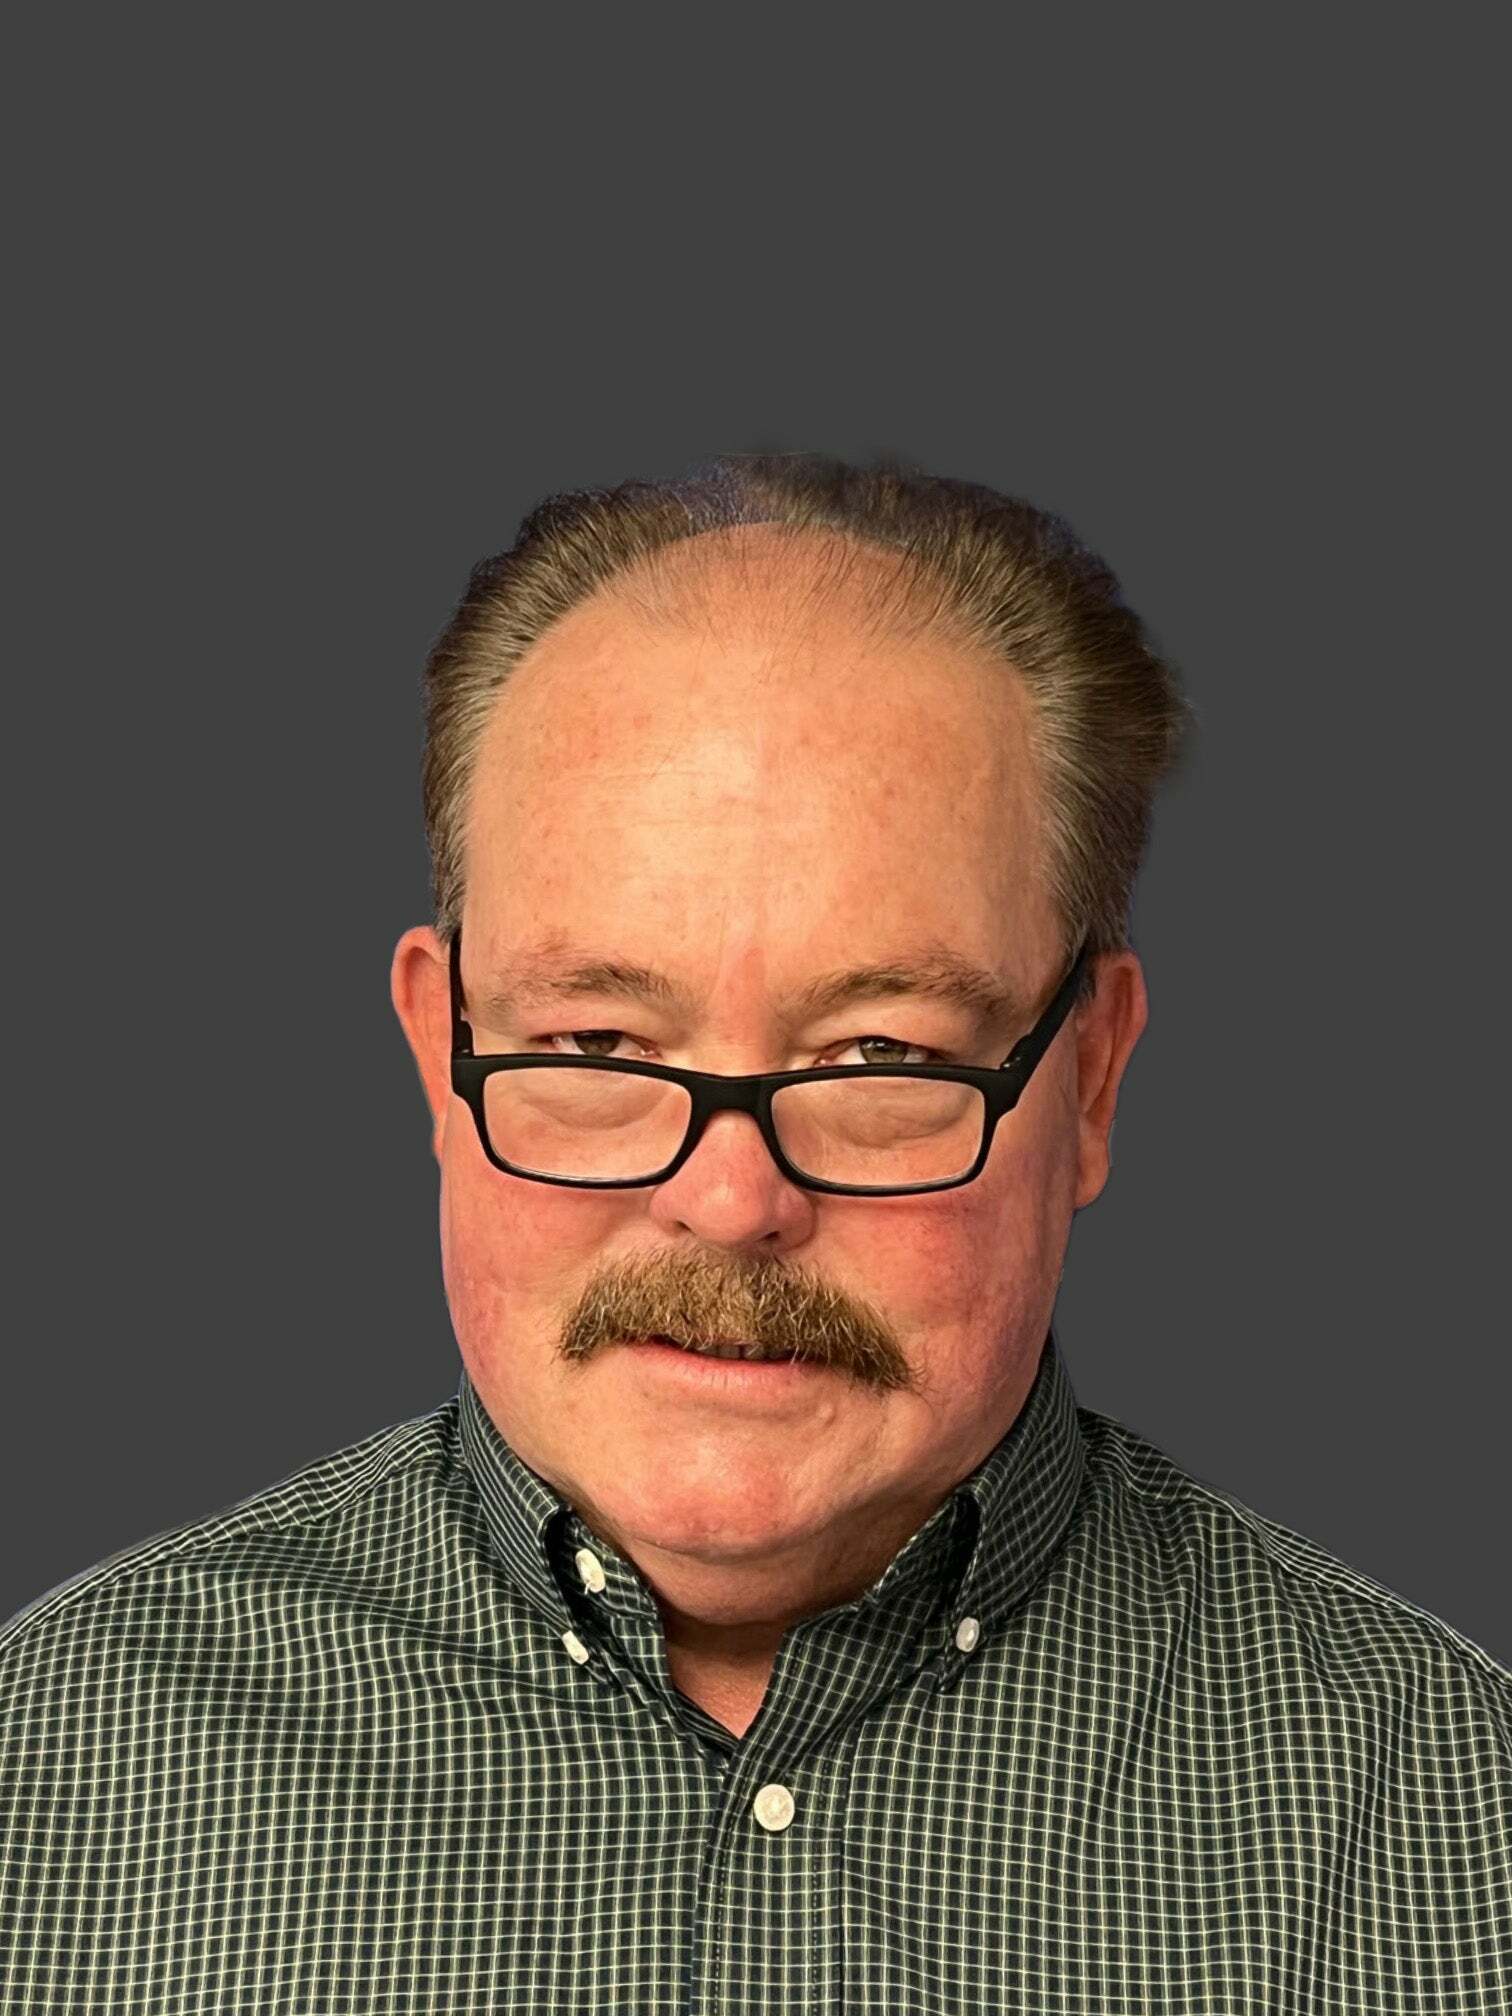 Harlan Beagley, Real Estate Salesperson in Dubois, Developac Realty